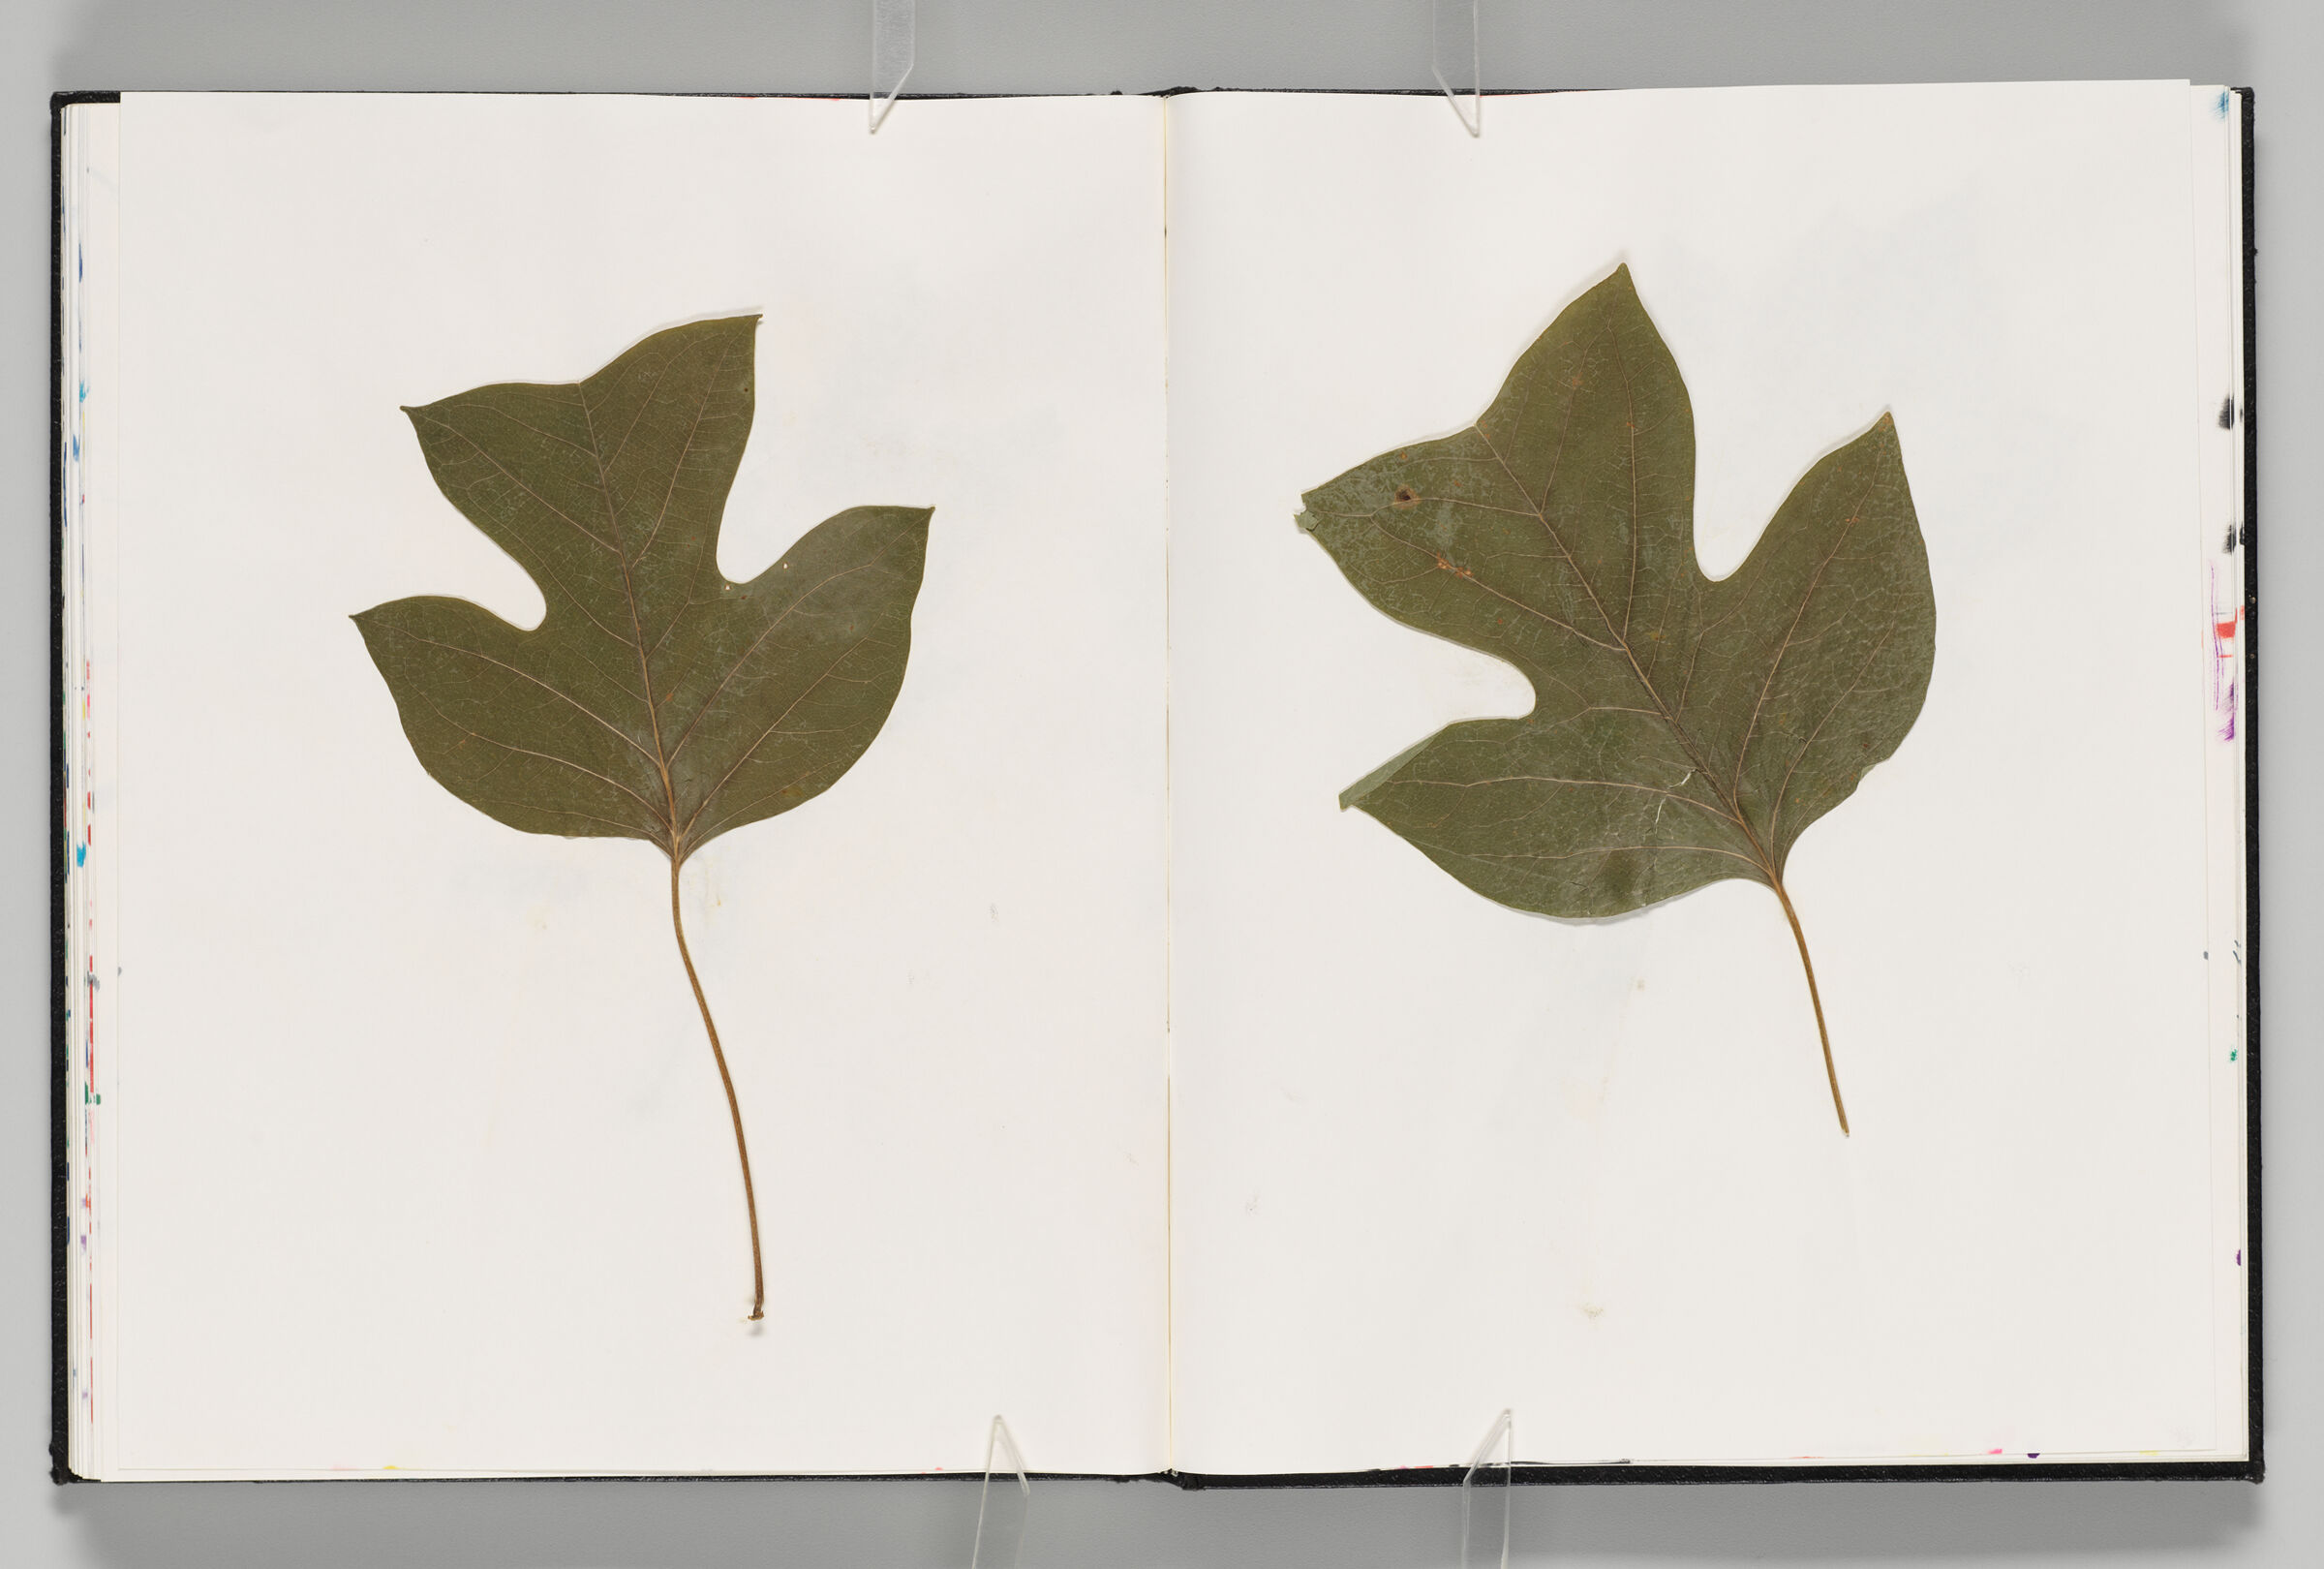 Untitled (Pressed And Adhered Leaf, Left Page); Untitled (Pressed And Adhered Leaf, Right Page)